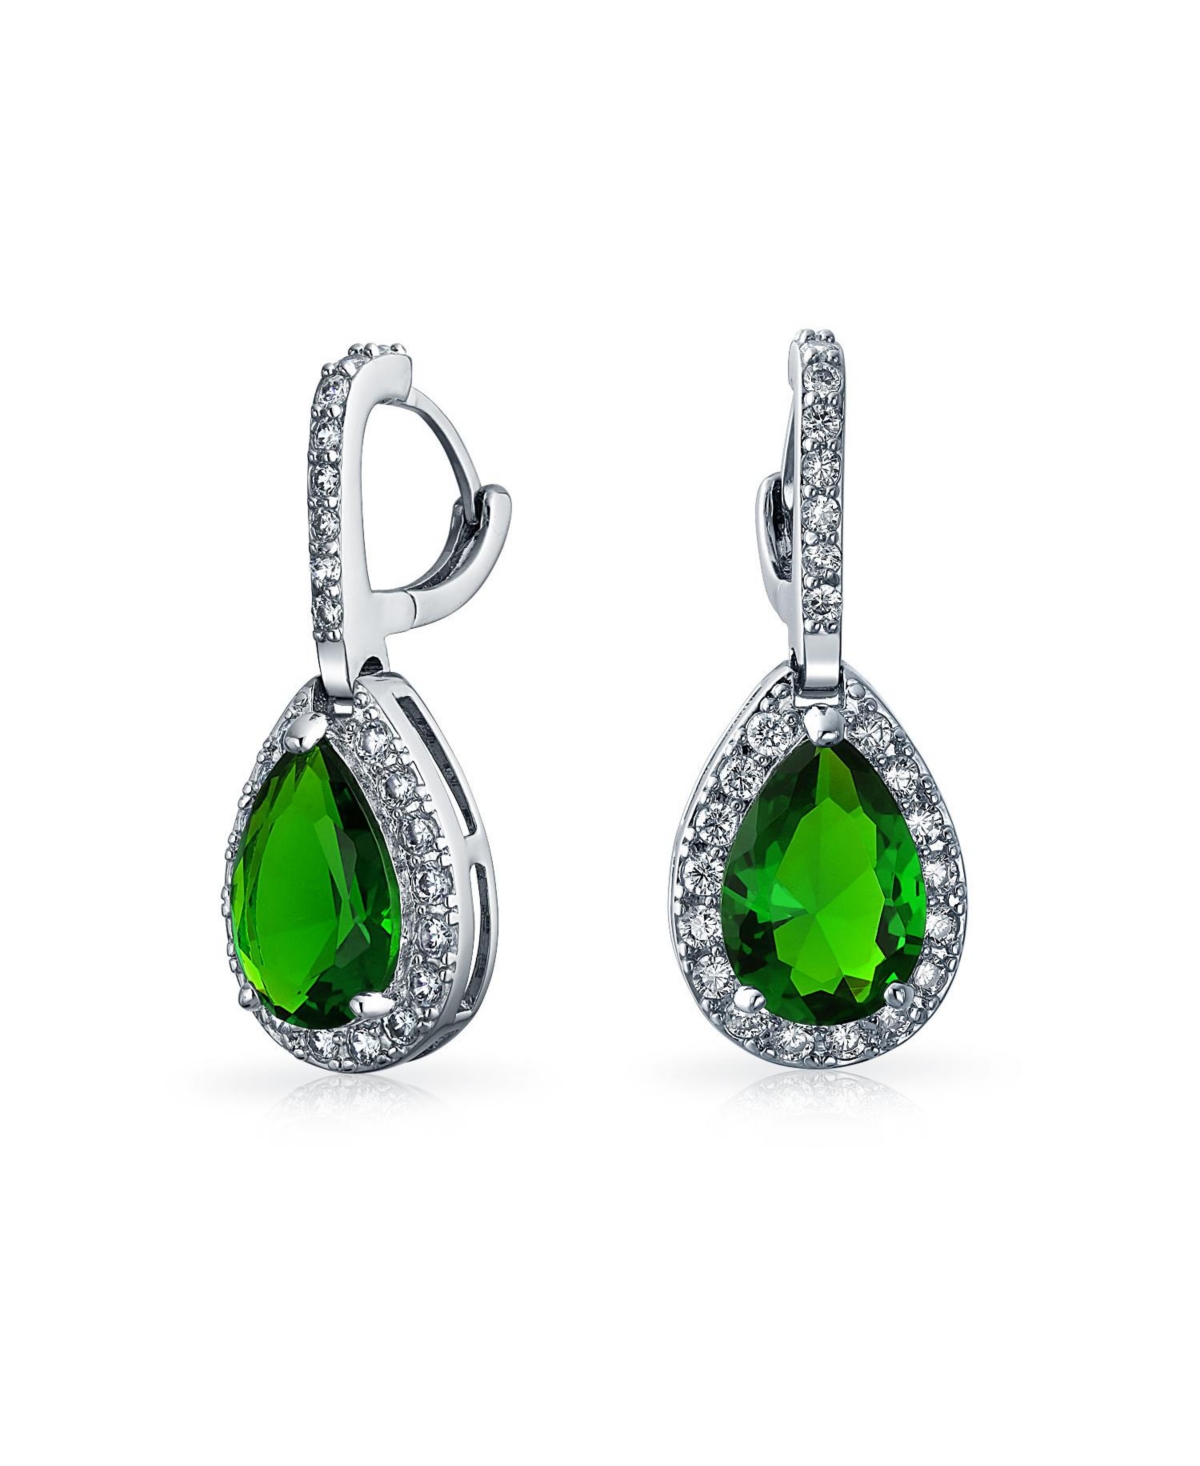 7CT Style Halo Simulated Green Emerald Cubic Zirconia Aaa Cz Fashion Dangling Drop Teardrop Earrings For Women Prom Bridesmaid Wedding Rhodium Plated